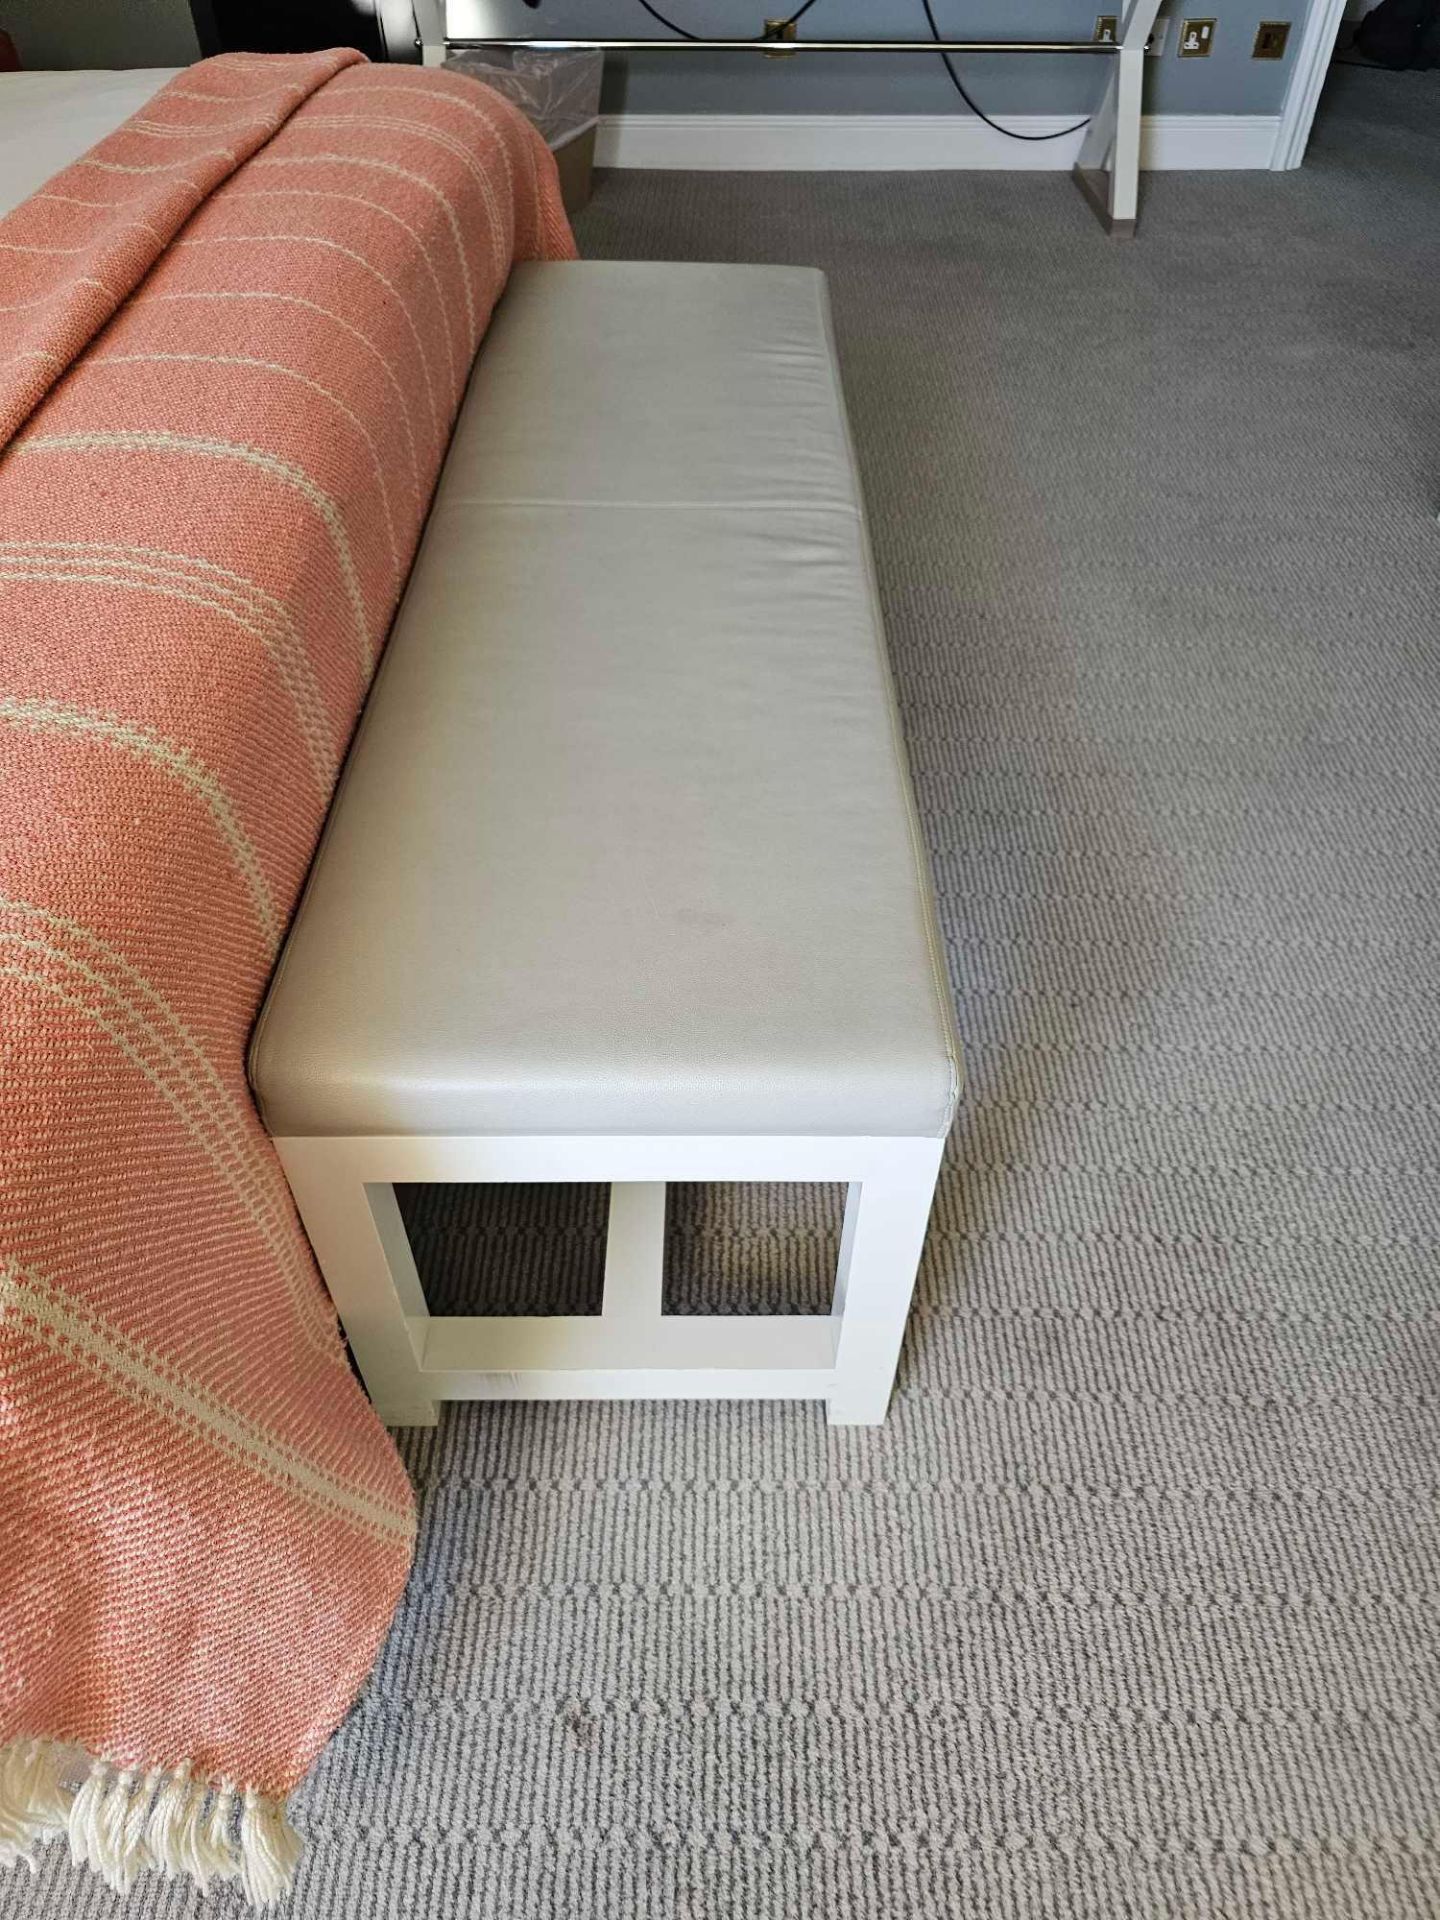 Bench This End Of Bed Bench Blends Wood Elements With A Neutral Leather Upholstery And Simple Design - Image 2 of 3